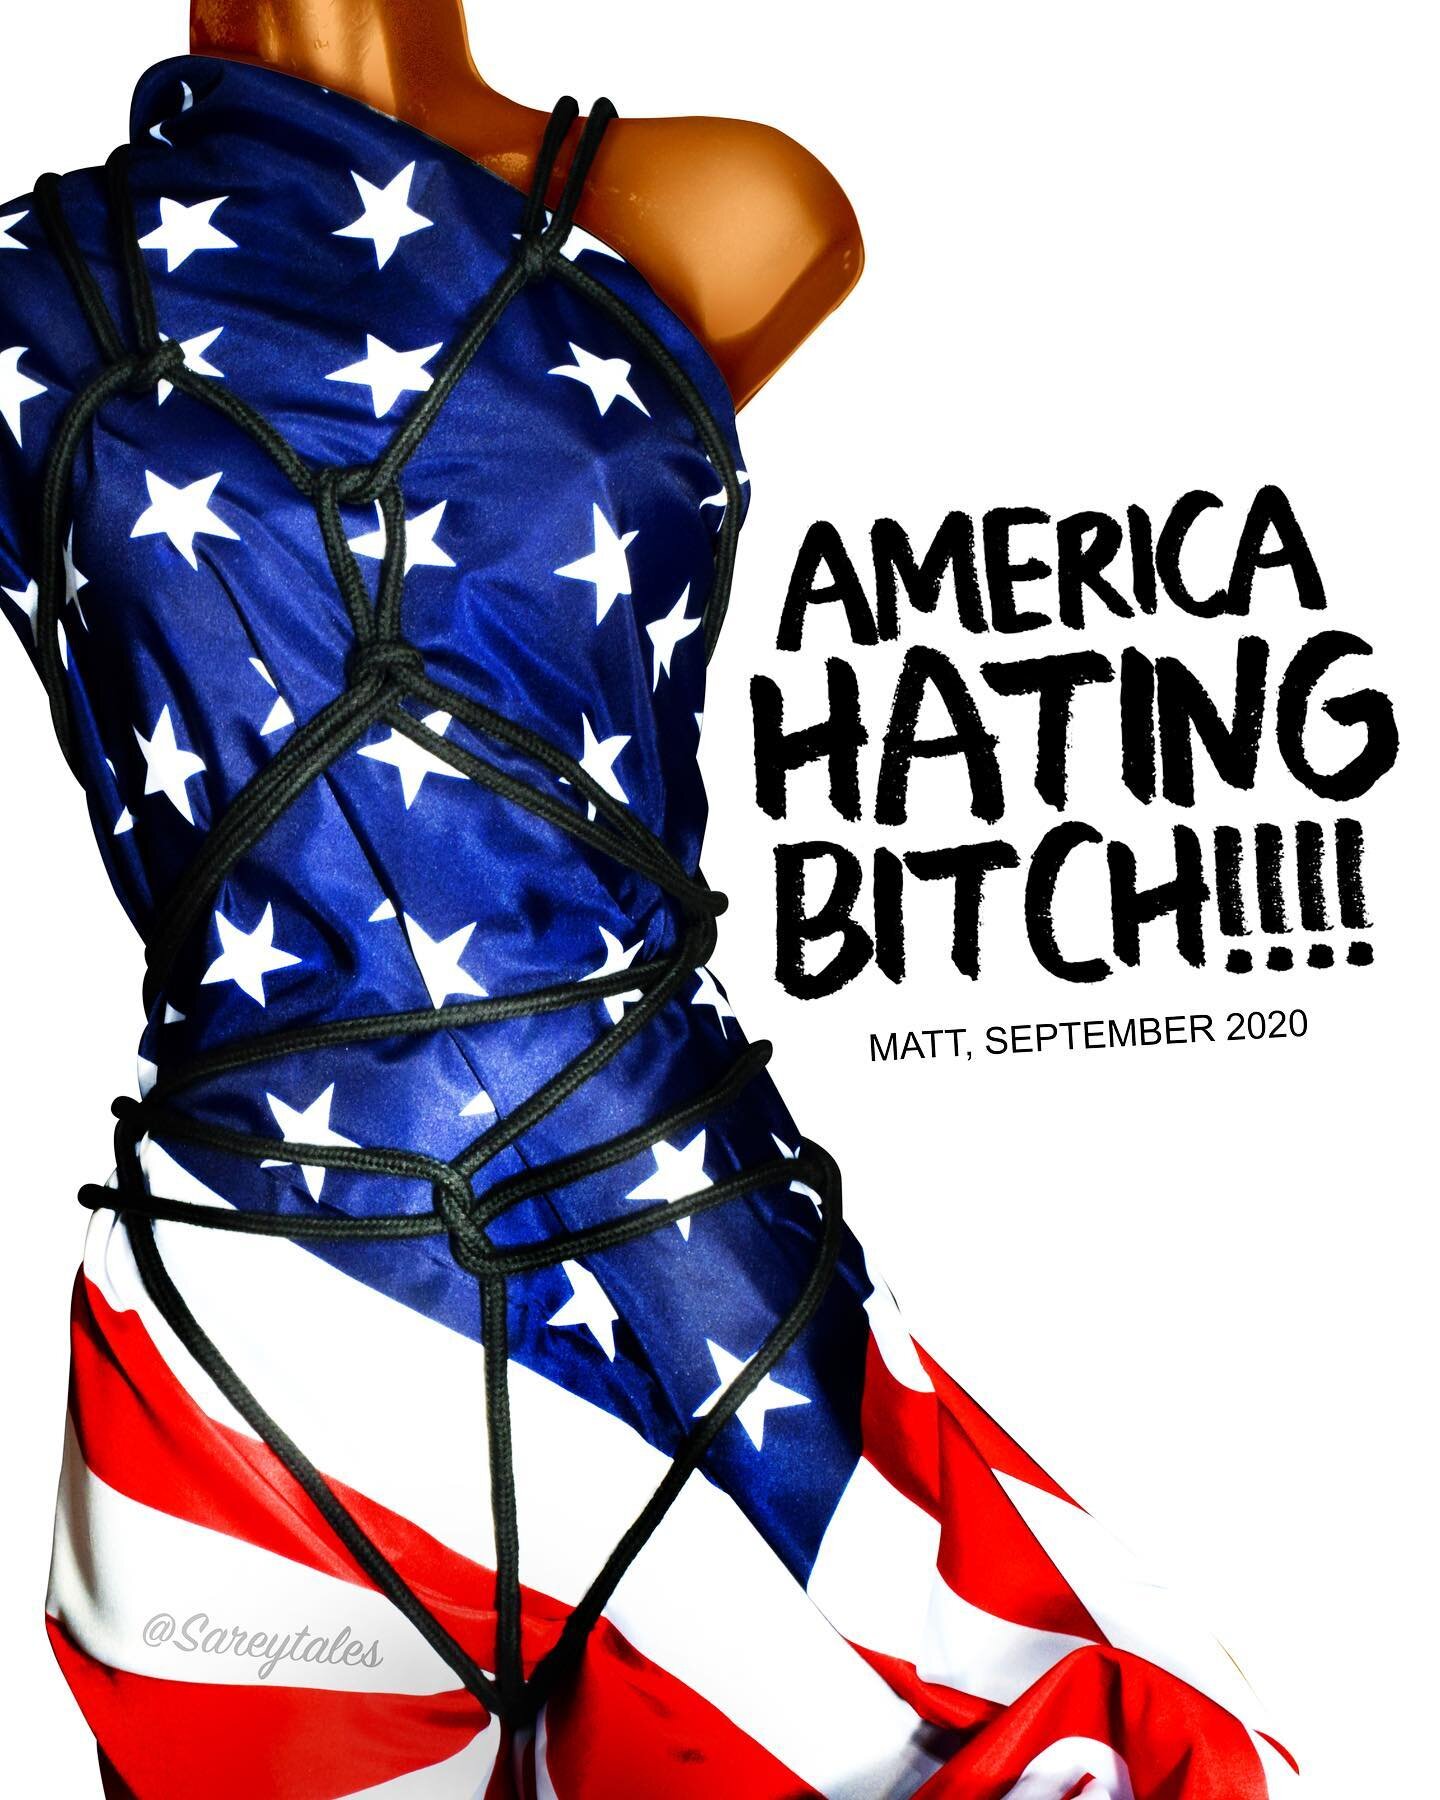 American Kink 4: Patriotism (American Flag, mannequin, digital illustration, 2020) 
🇺🇸

This was the fourth and final piece in my &ldquo;American Kink&rdquo; series back in November 2020. I wanted to share it again today, on Jan. 6th, 2023, two yea